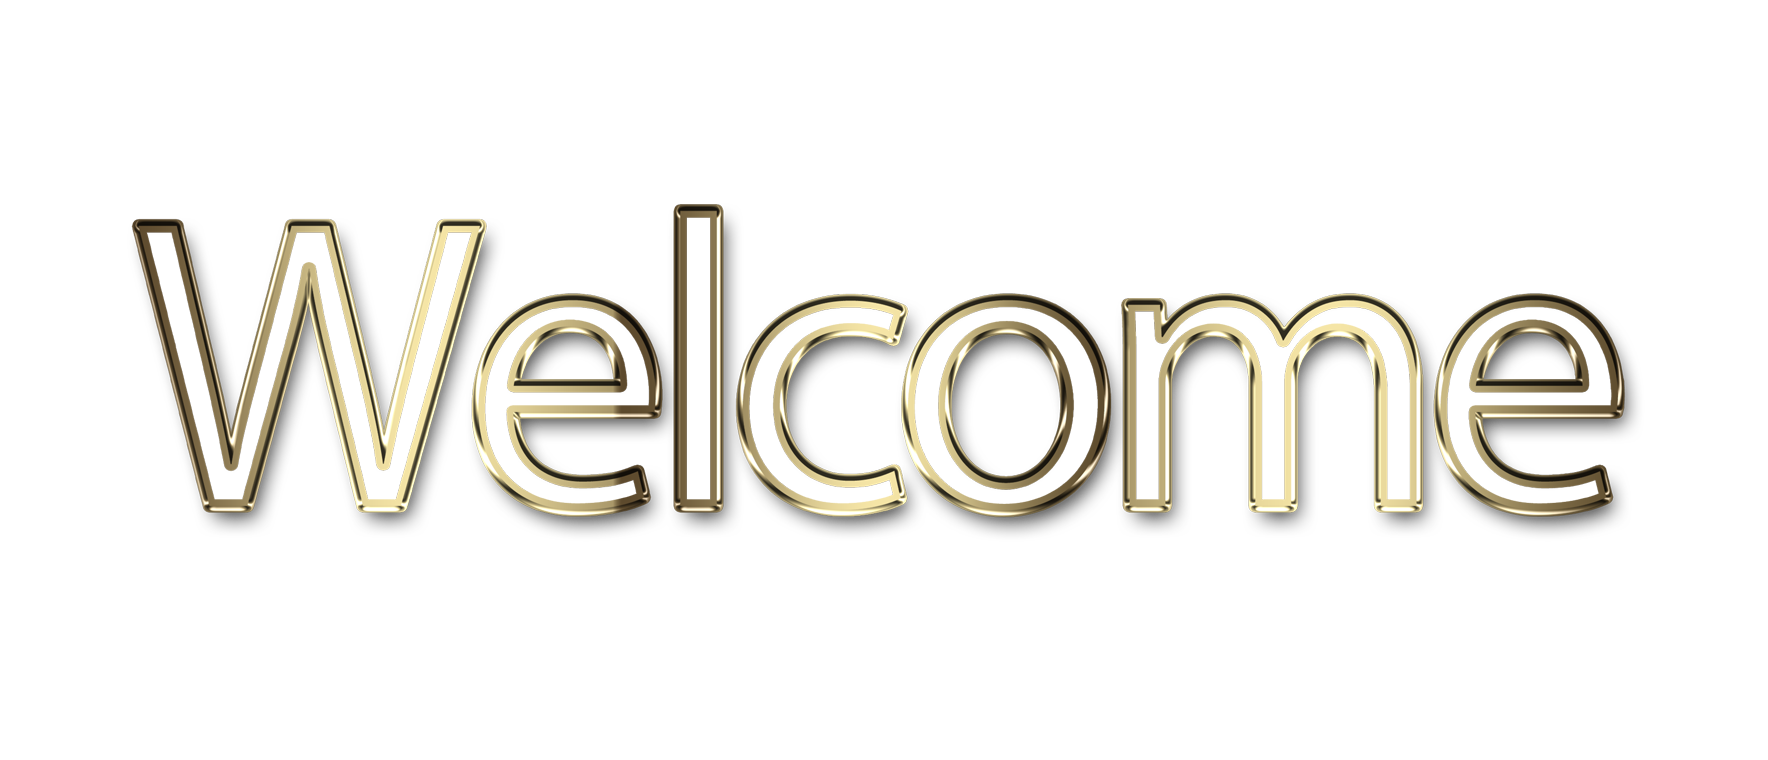 Welcome png, word Welcome png, Welcome word png, Welcome text png, Welcome letters png, Welcome word art typography PNG images, transparent png